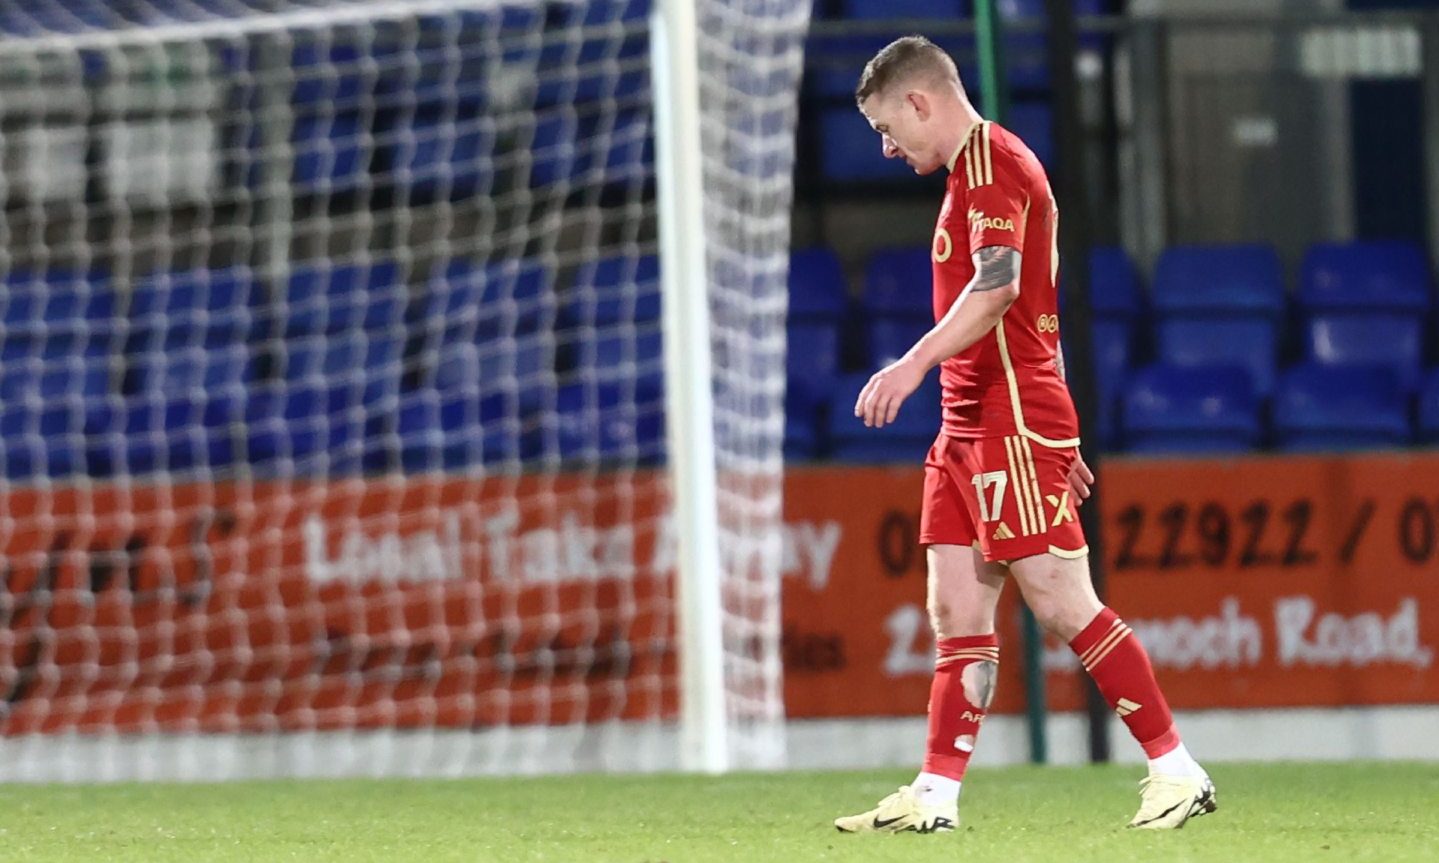 Jonny Hayes reveals even his nine-year-old son has been criticising him over Aberdeen’s poor form